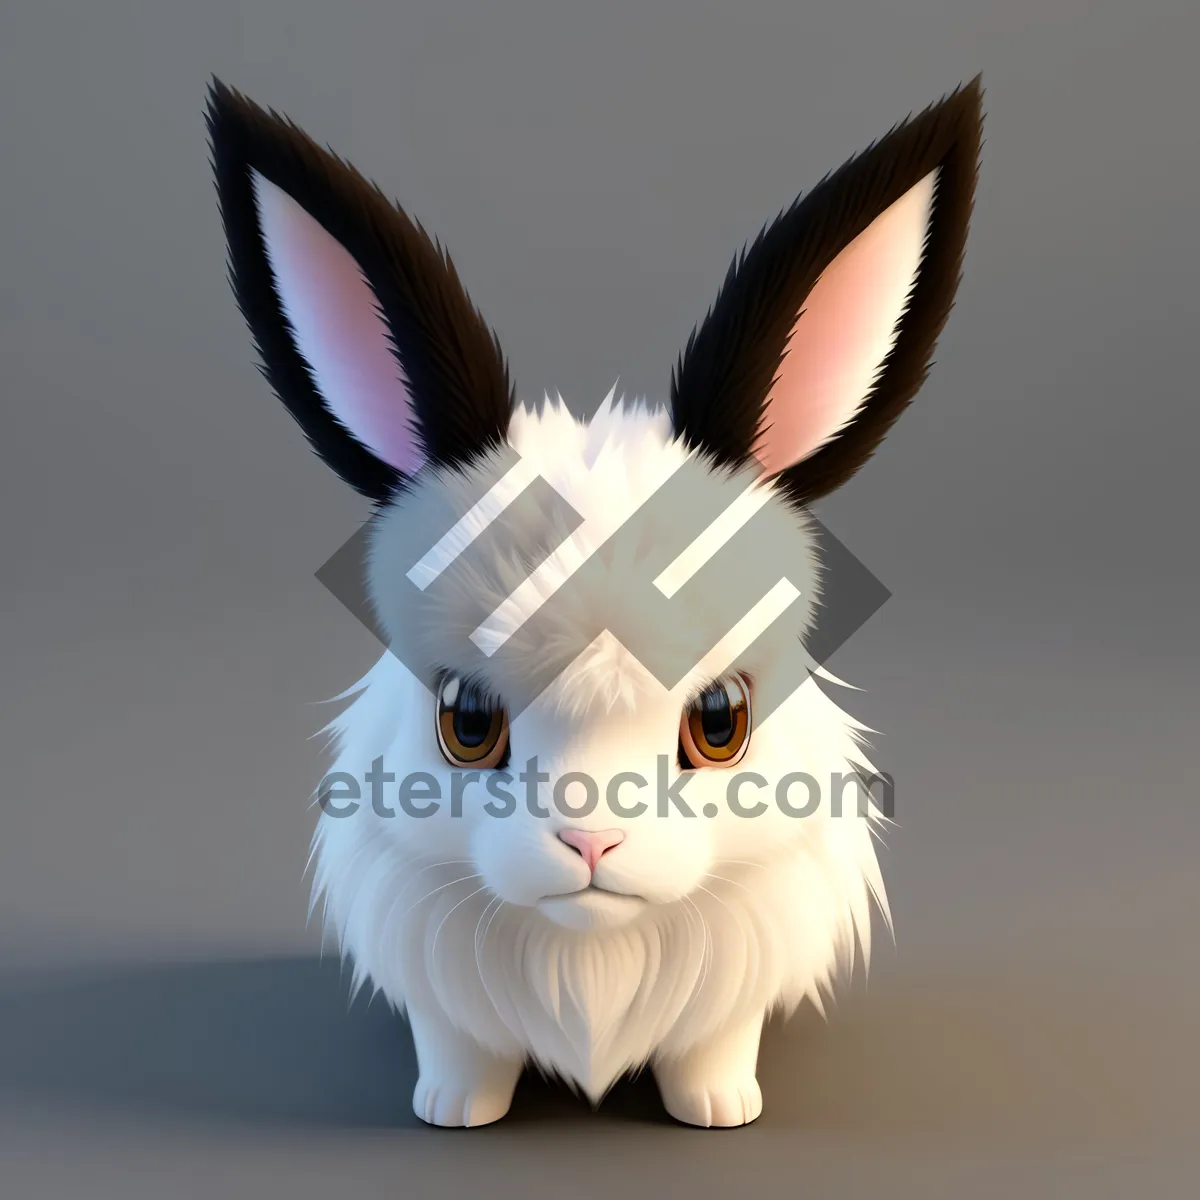 Picture of Fluffy Bunny with Soft Ears - Adorable Domestic Pet